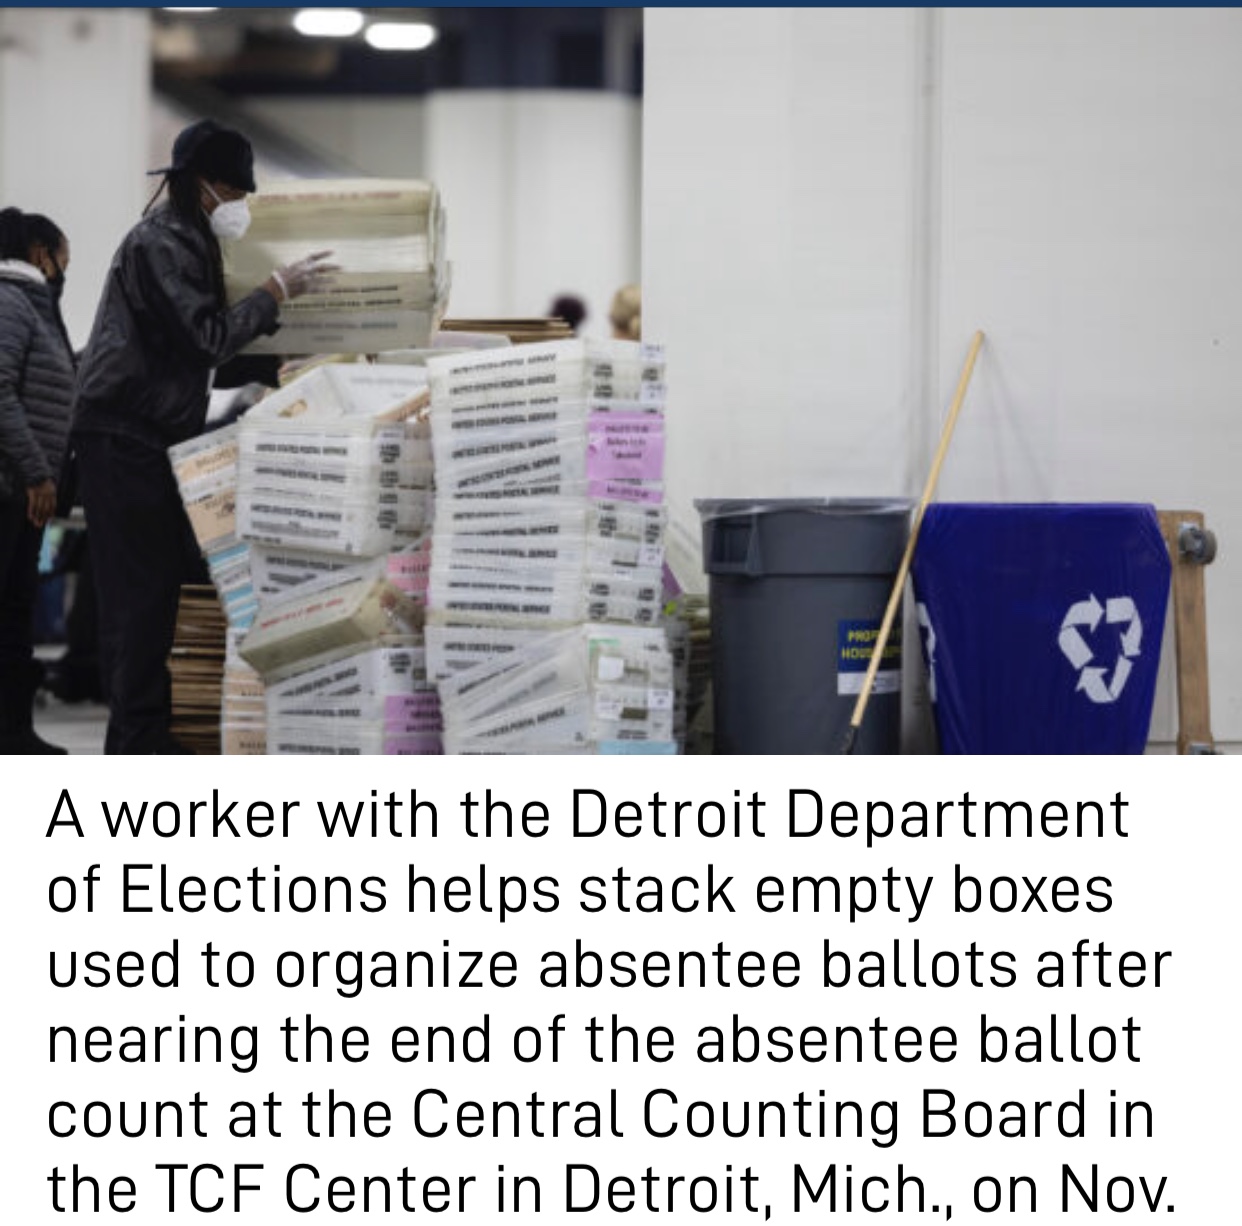 Tens of Thousands of Unsealed Ballots Arrived in Michigan County, All for Democrats: Lawsuit